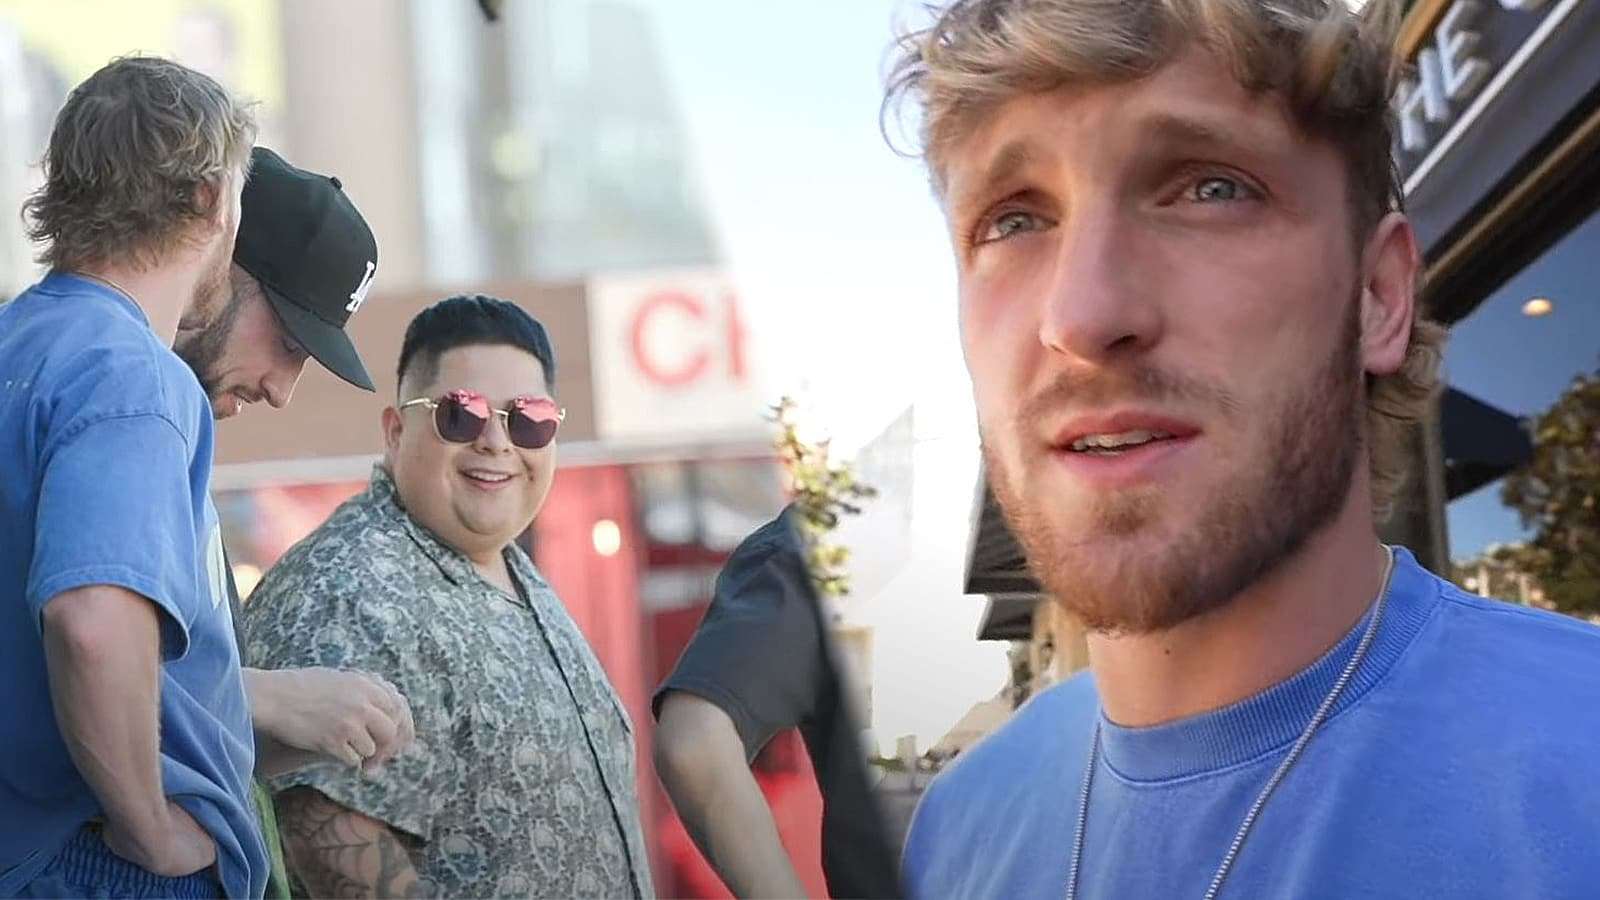 Logan paul confronted by hater